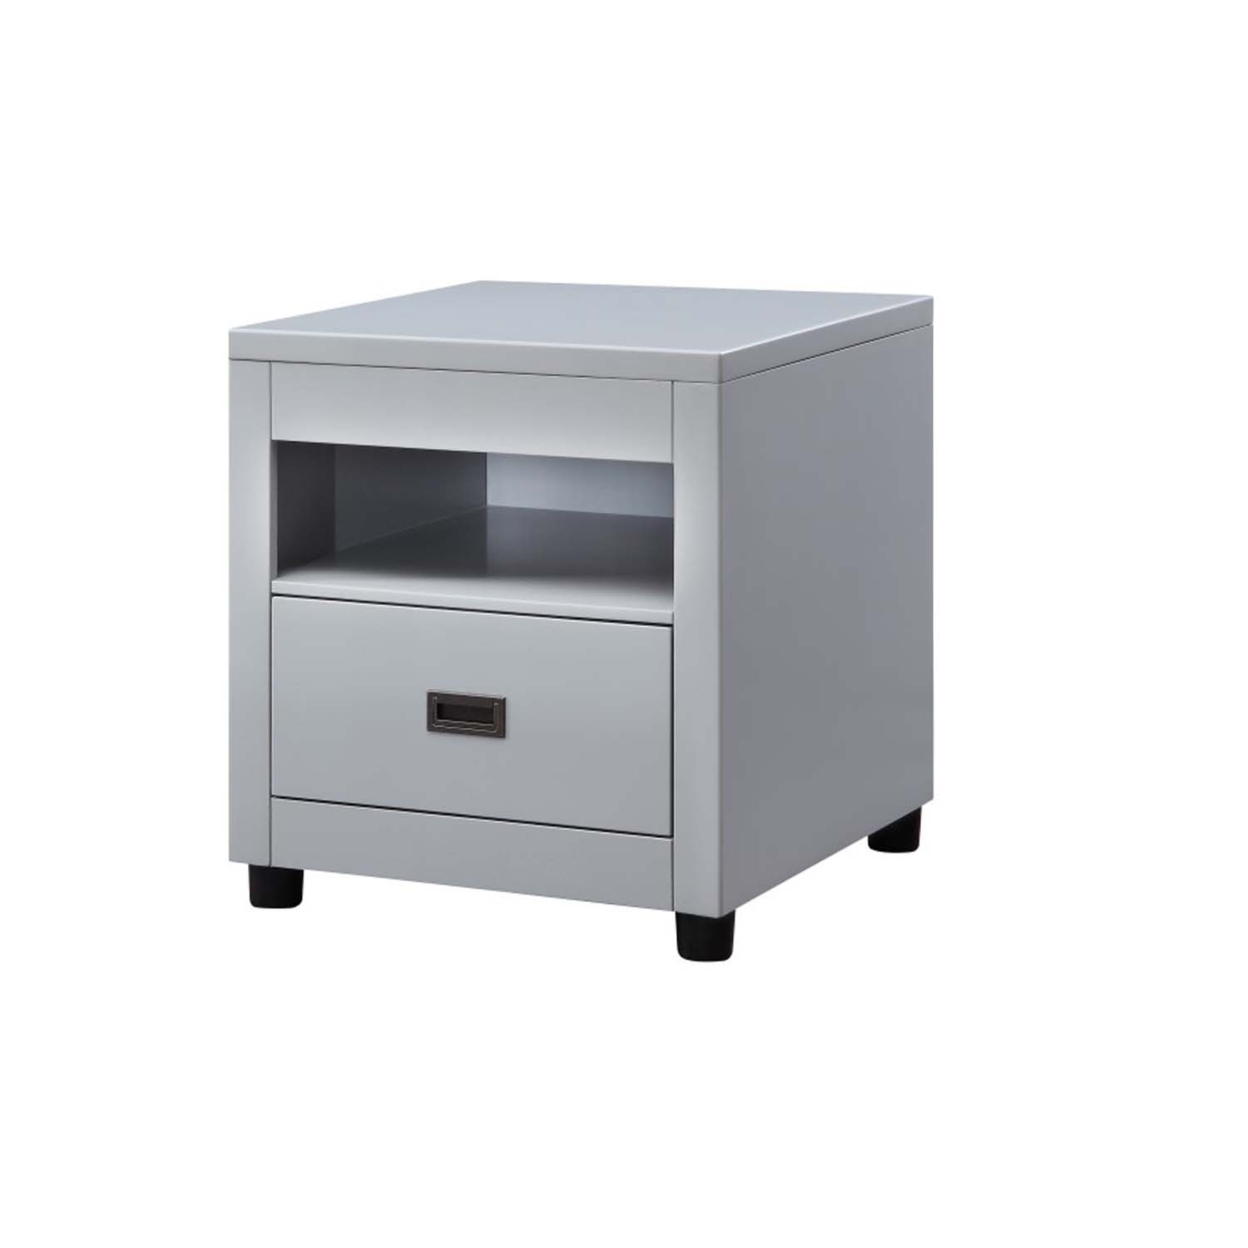 Transitional Style Wooden End Table With 1 Drawer, Gray And Black- Saltoro Sherpi